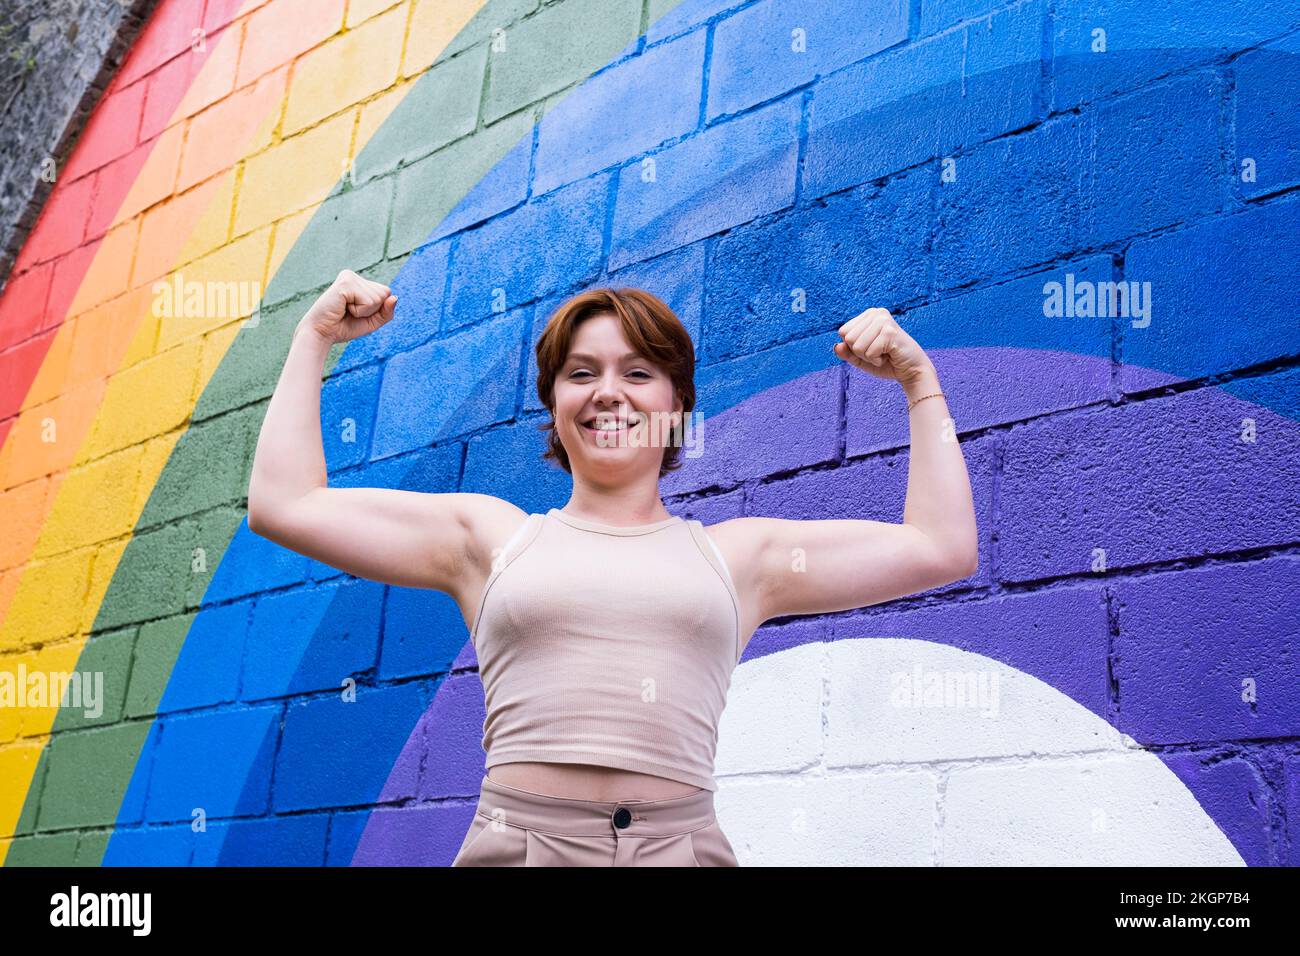 Happy young woman flexing muscles in front of rainbow flag painted on wall Stock Photo